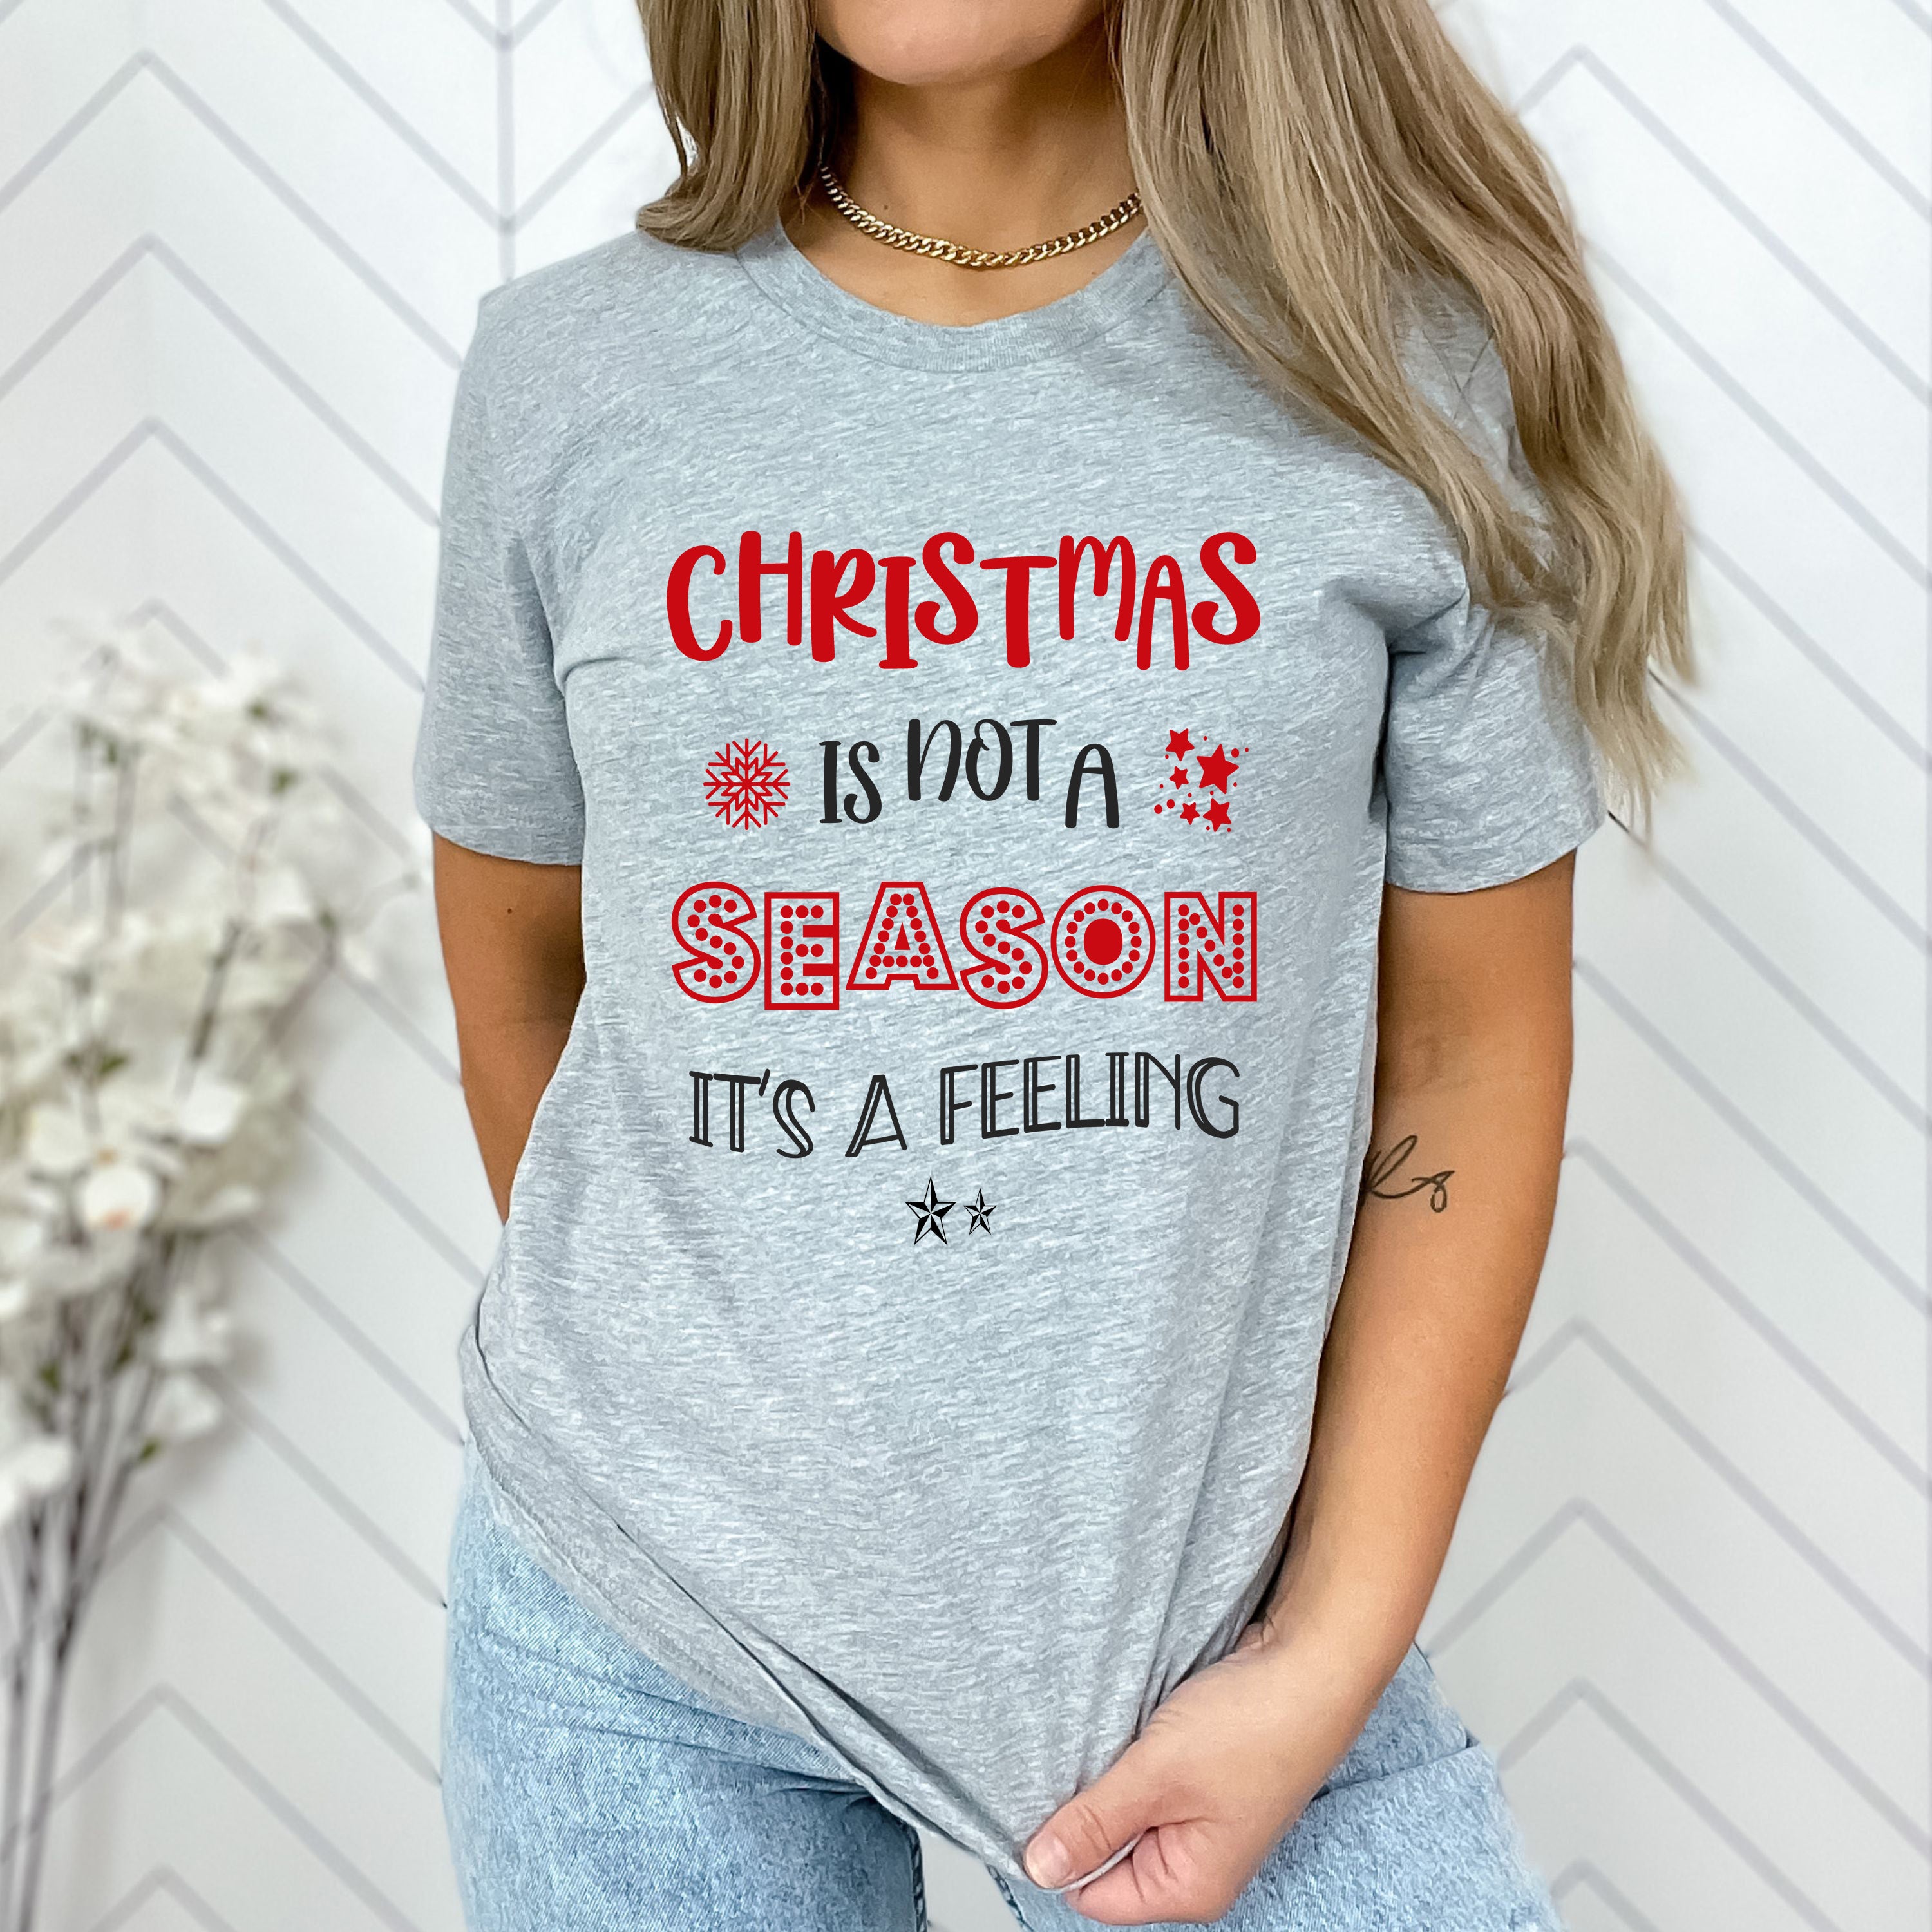 " Christmas is not a season NEW  "